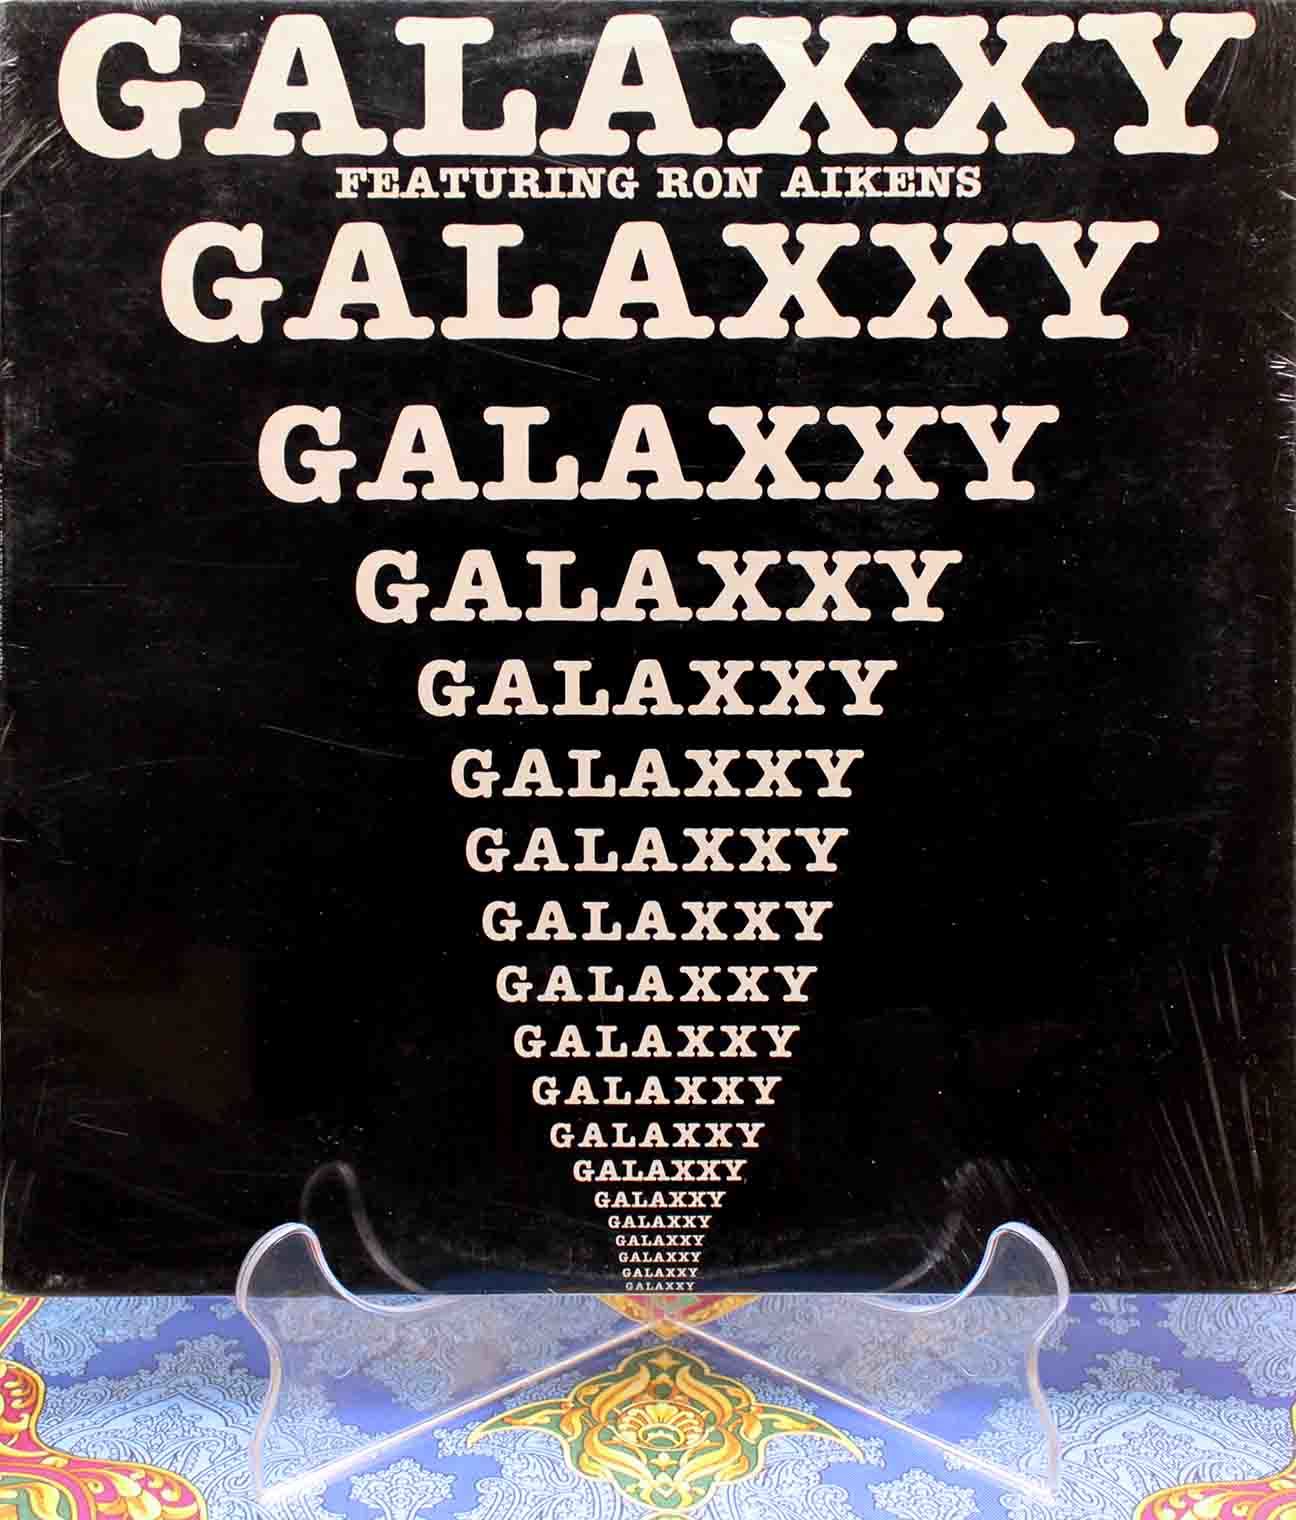 Galaxxy Featuring Ron Aikens (1980) – Galaxxy 01